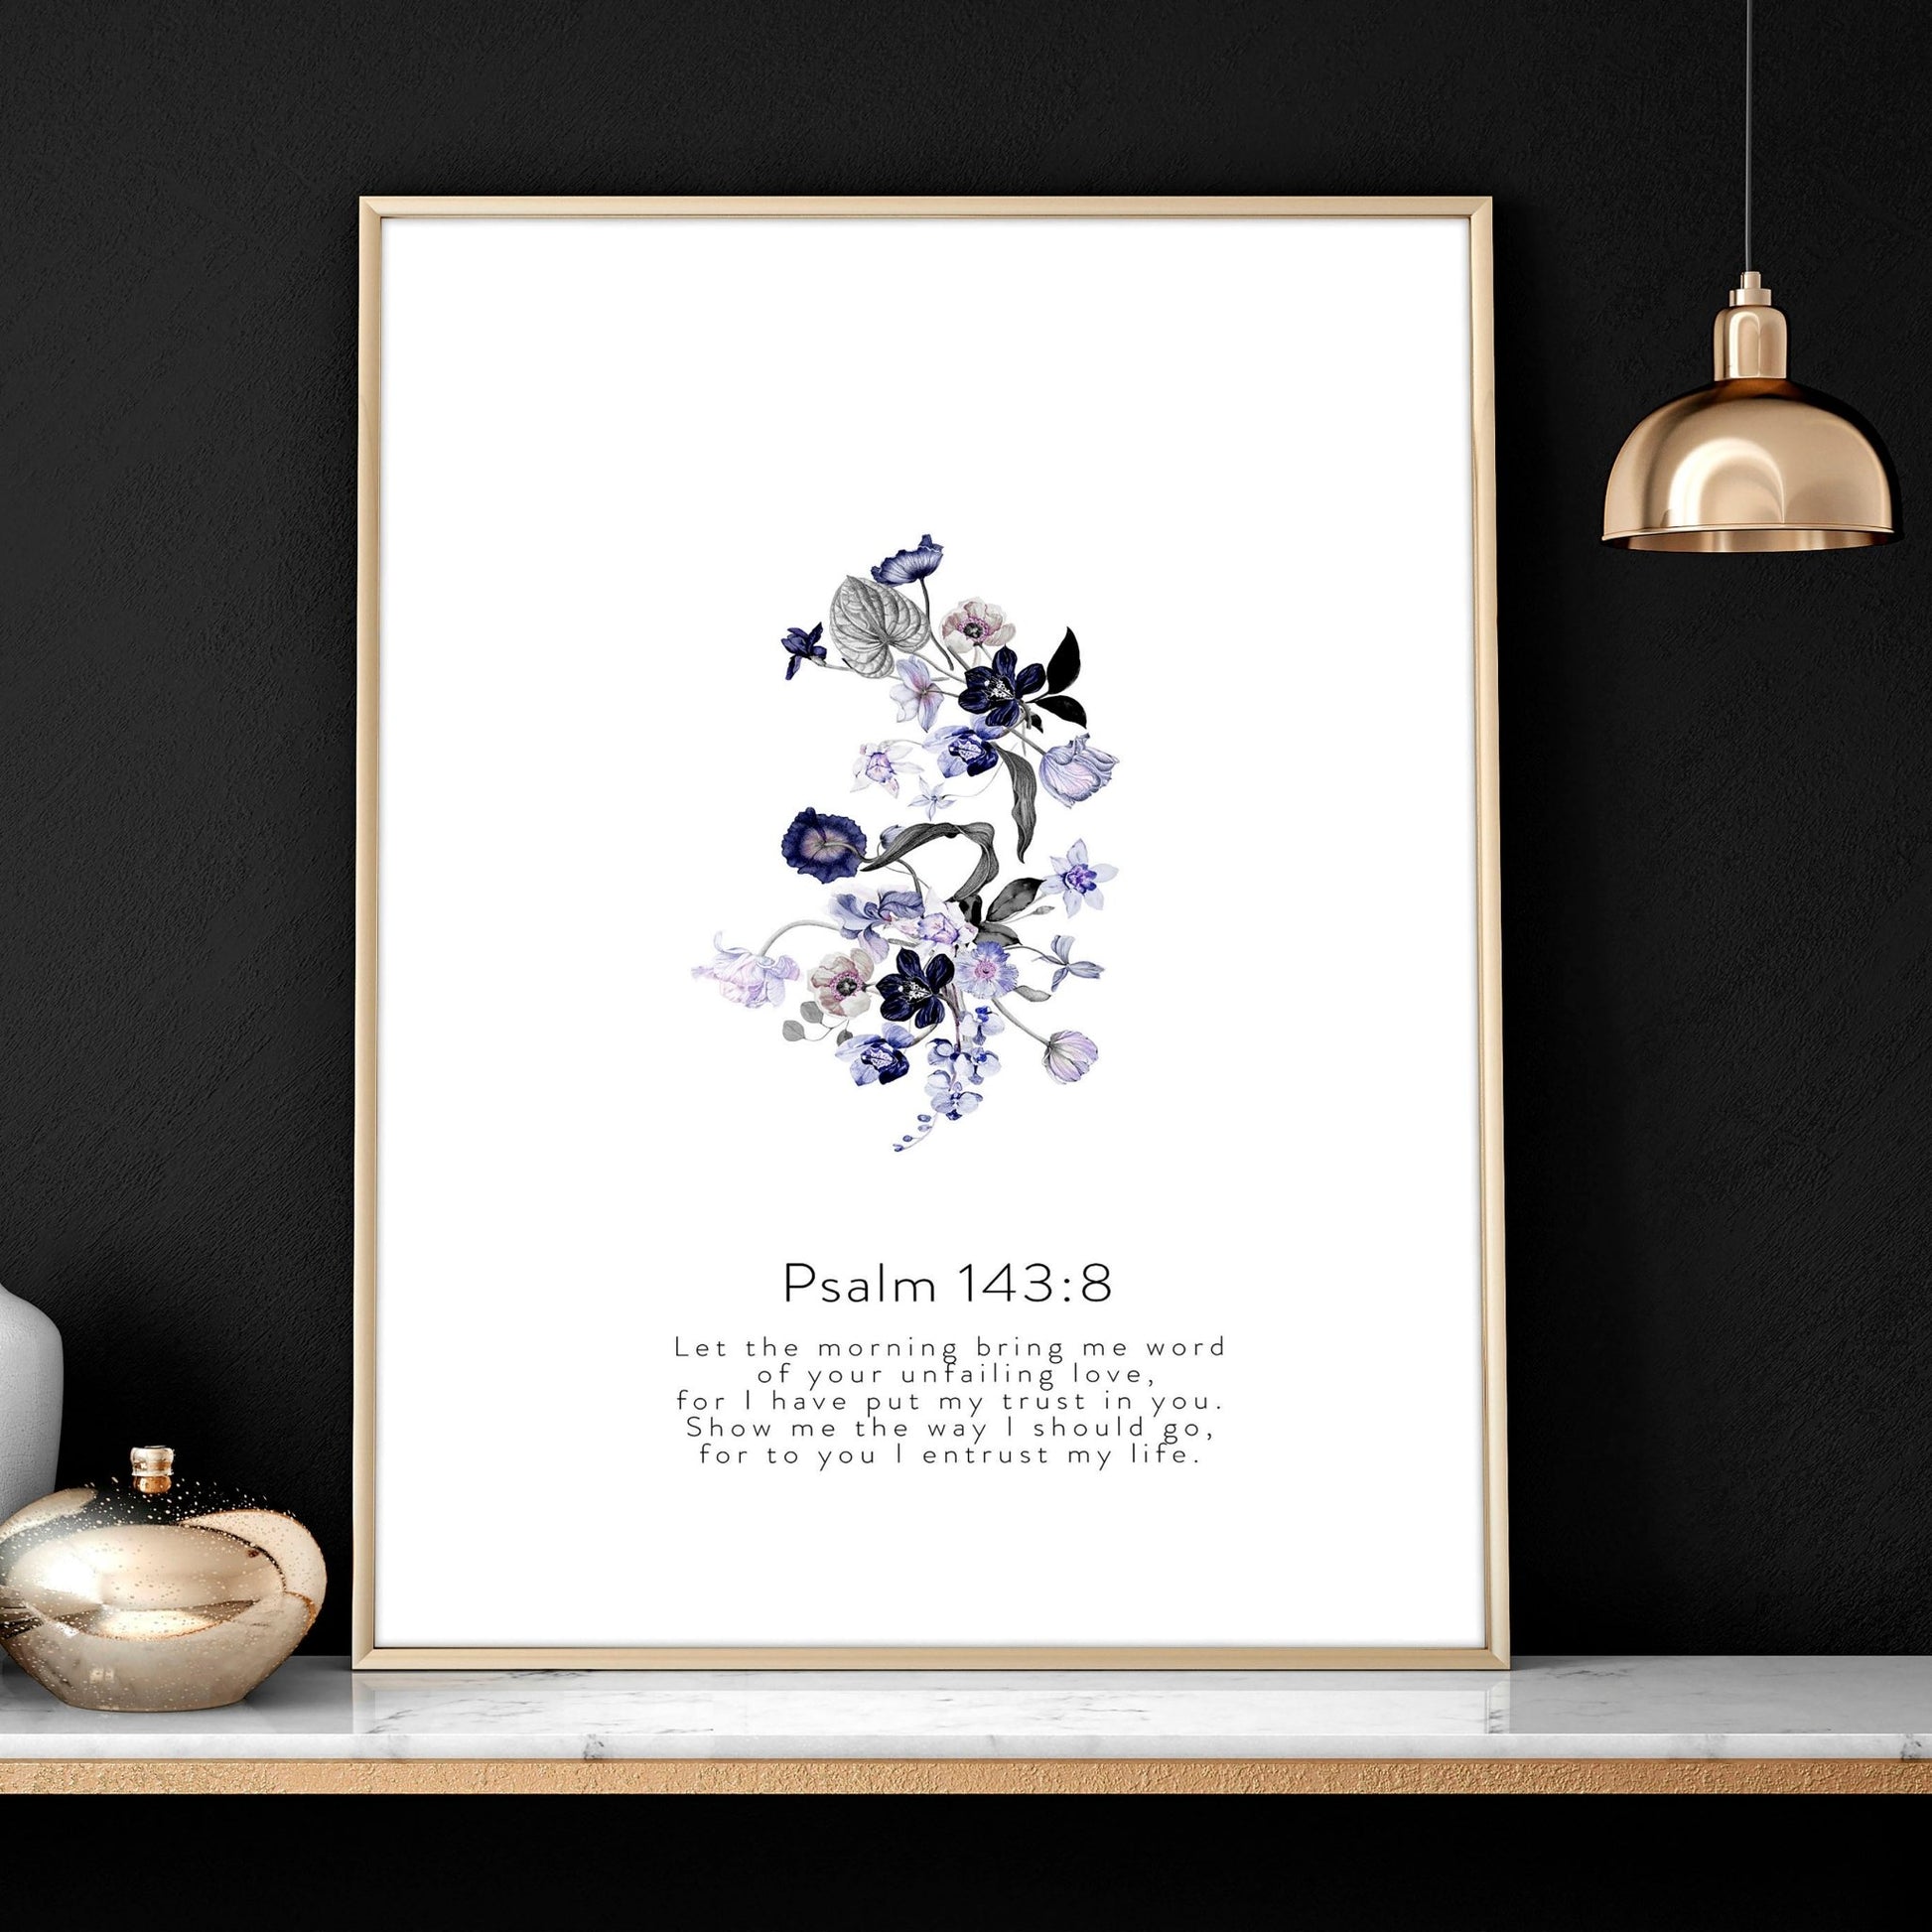 Christianity pictures wall art for living room | set of 3 wall art prints